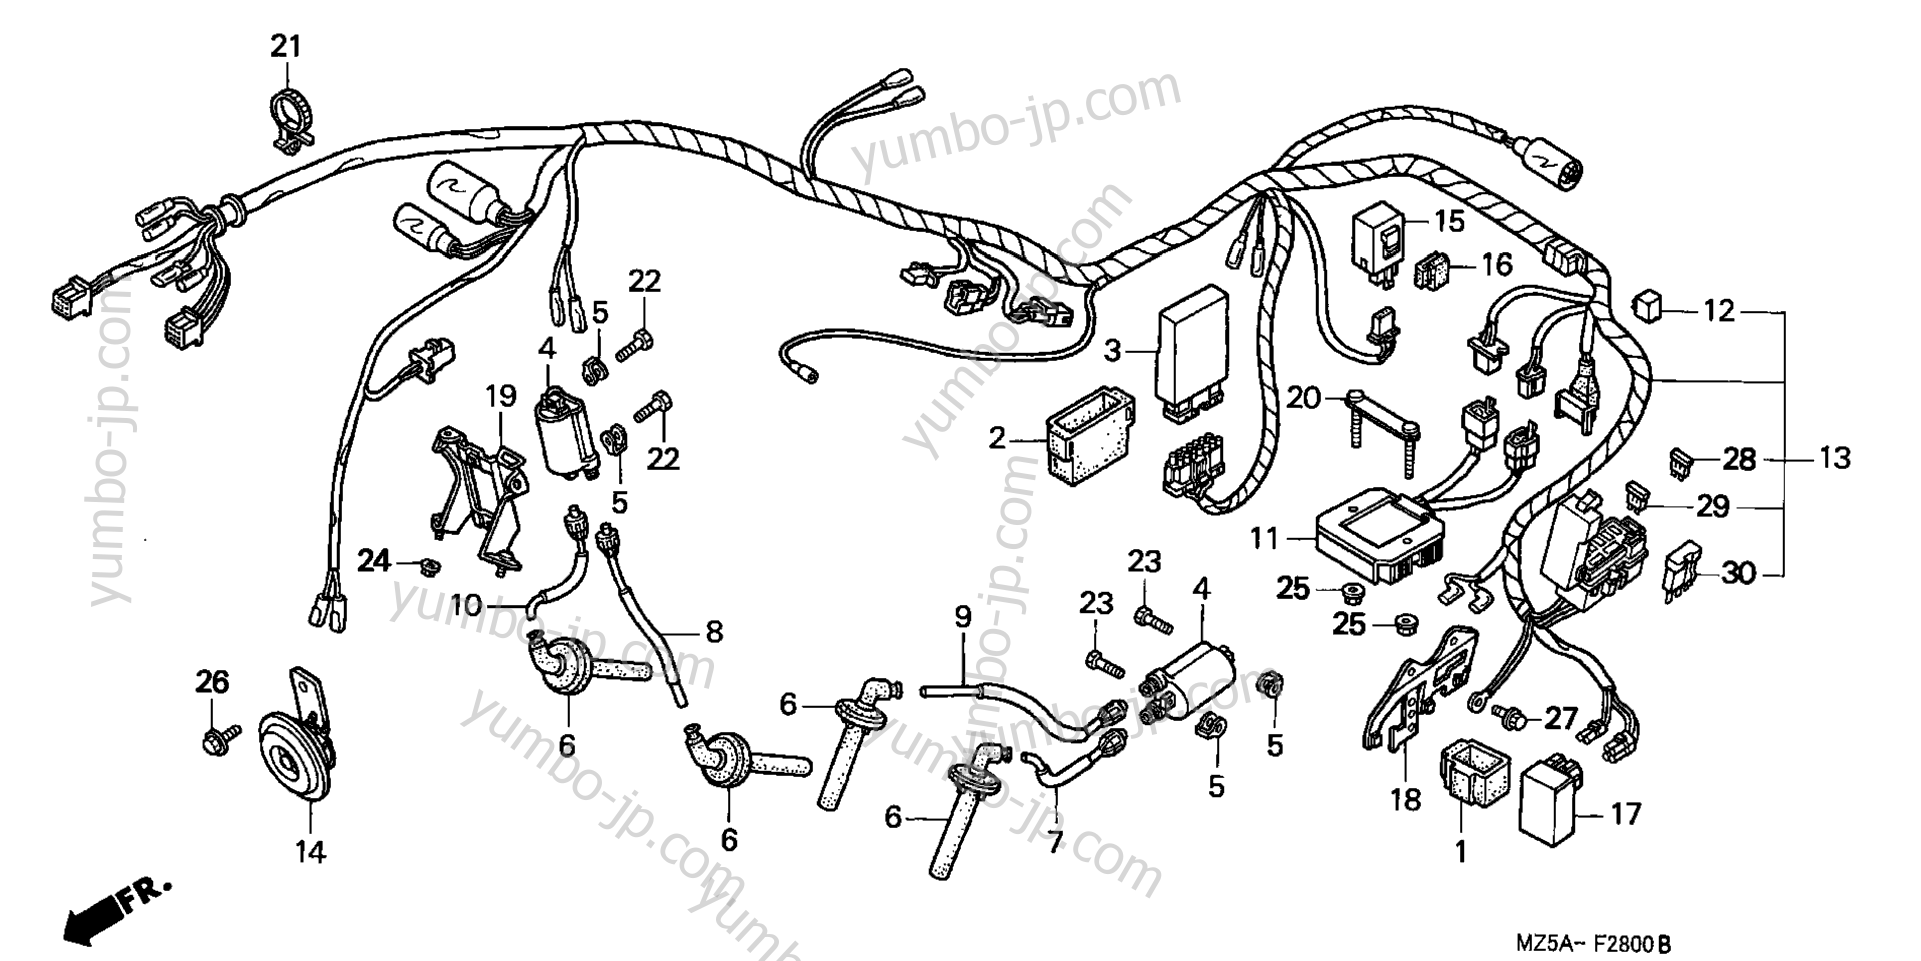 WIRE HARNESS for motorcycles HONDA VF750C A 2002 year